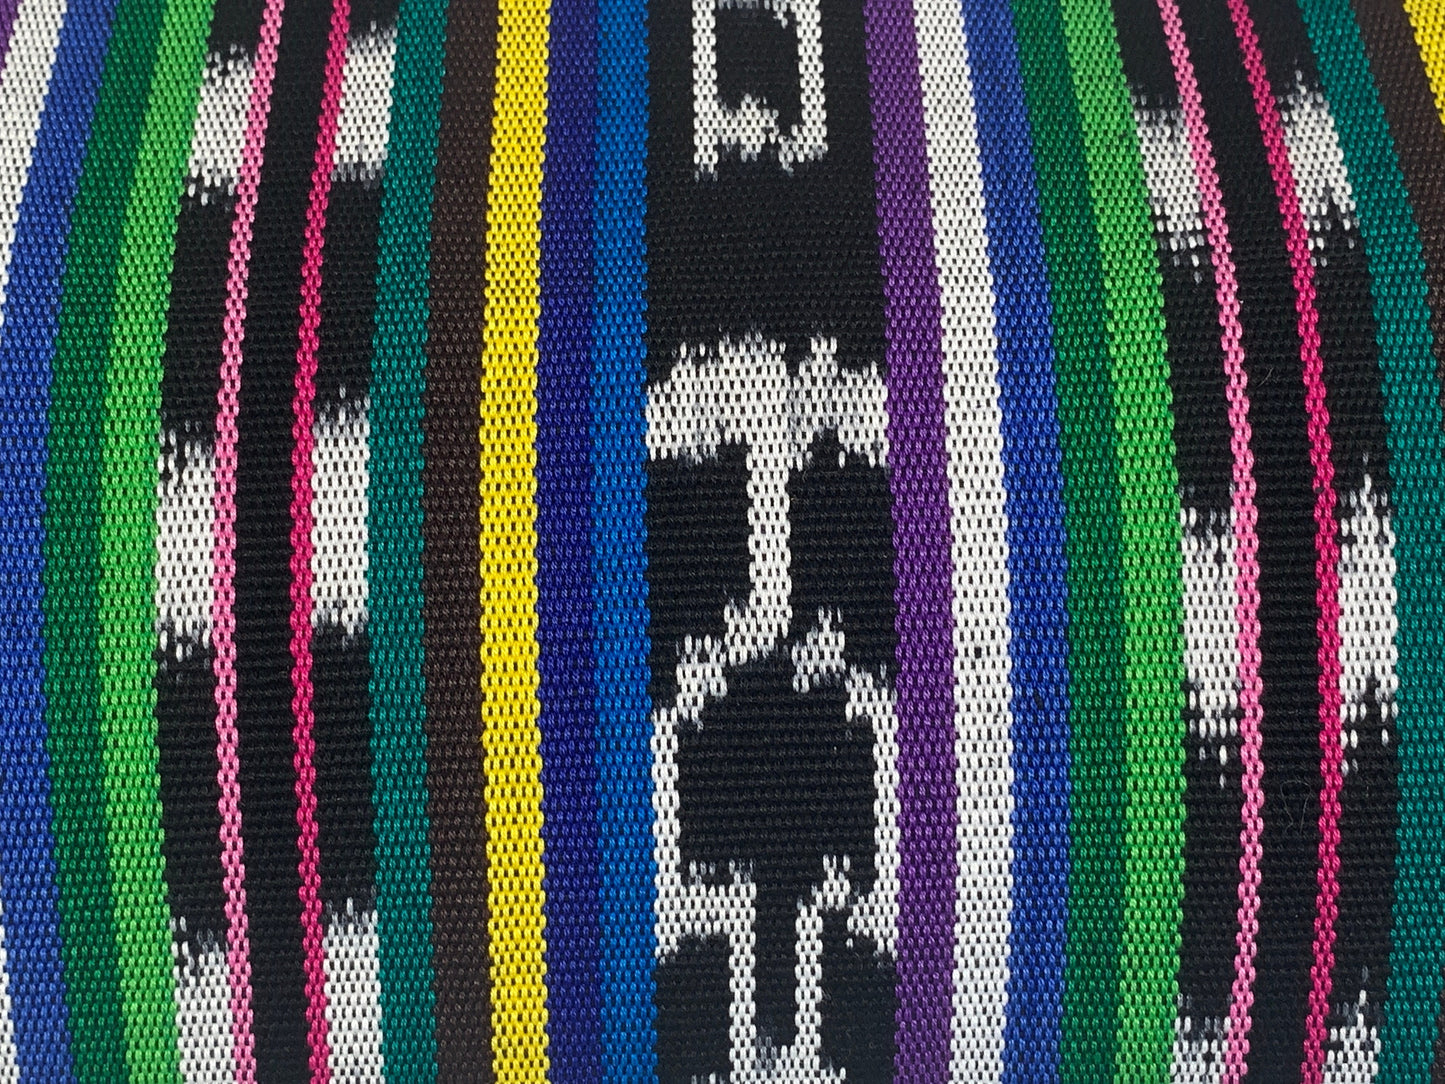 Guatemalan Handwoven Black & White Ikat with Assorted Colors